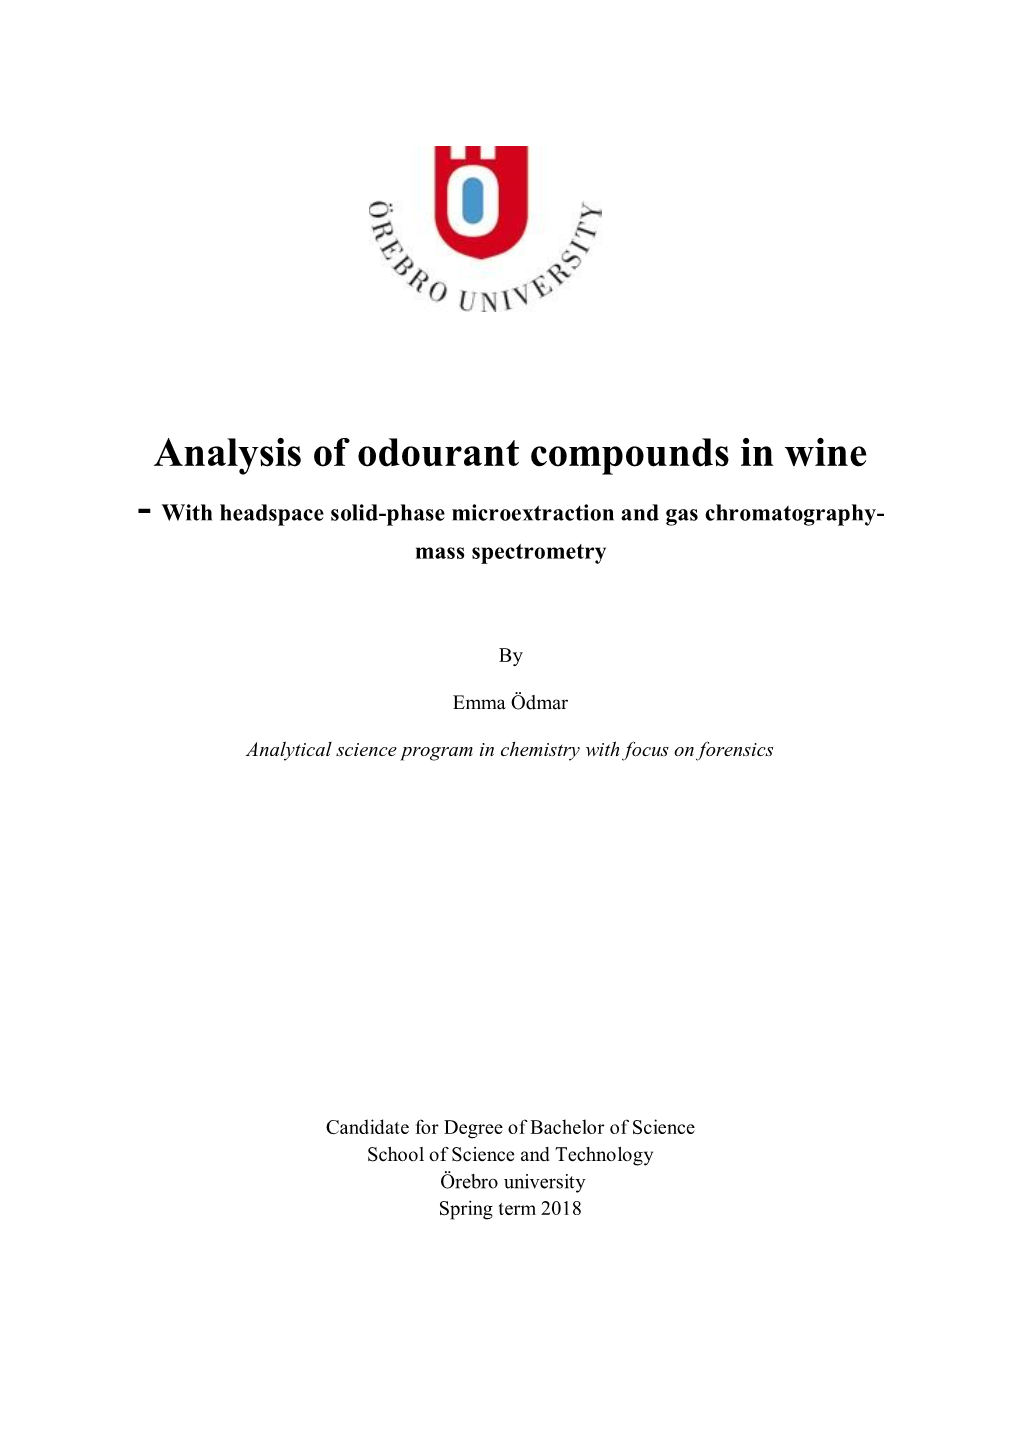 Analysis of Odourant Compounds in Wine - with Headspace Solid-Phase Microextraction and Gas Chromatography- Mass Spectrometry